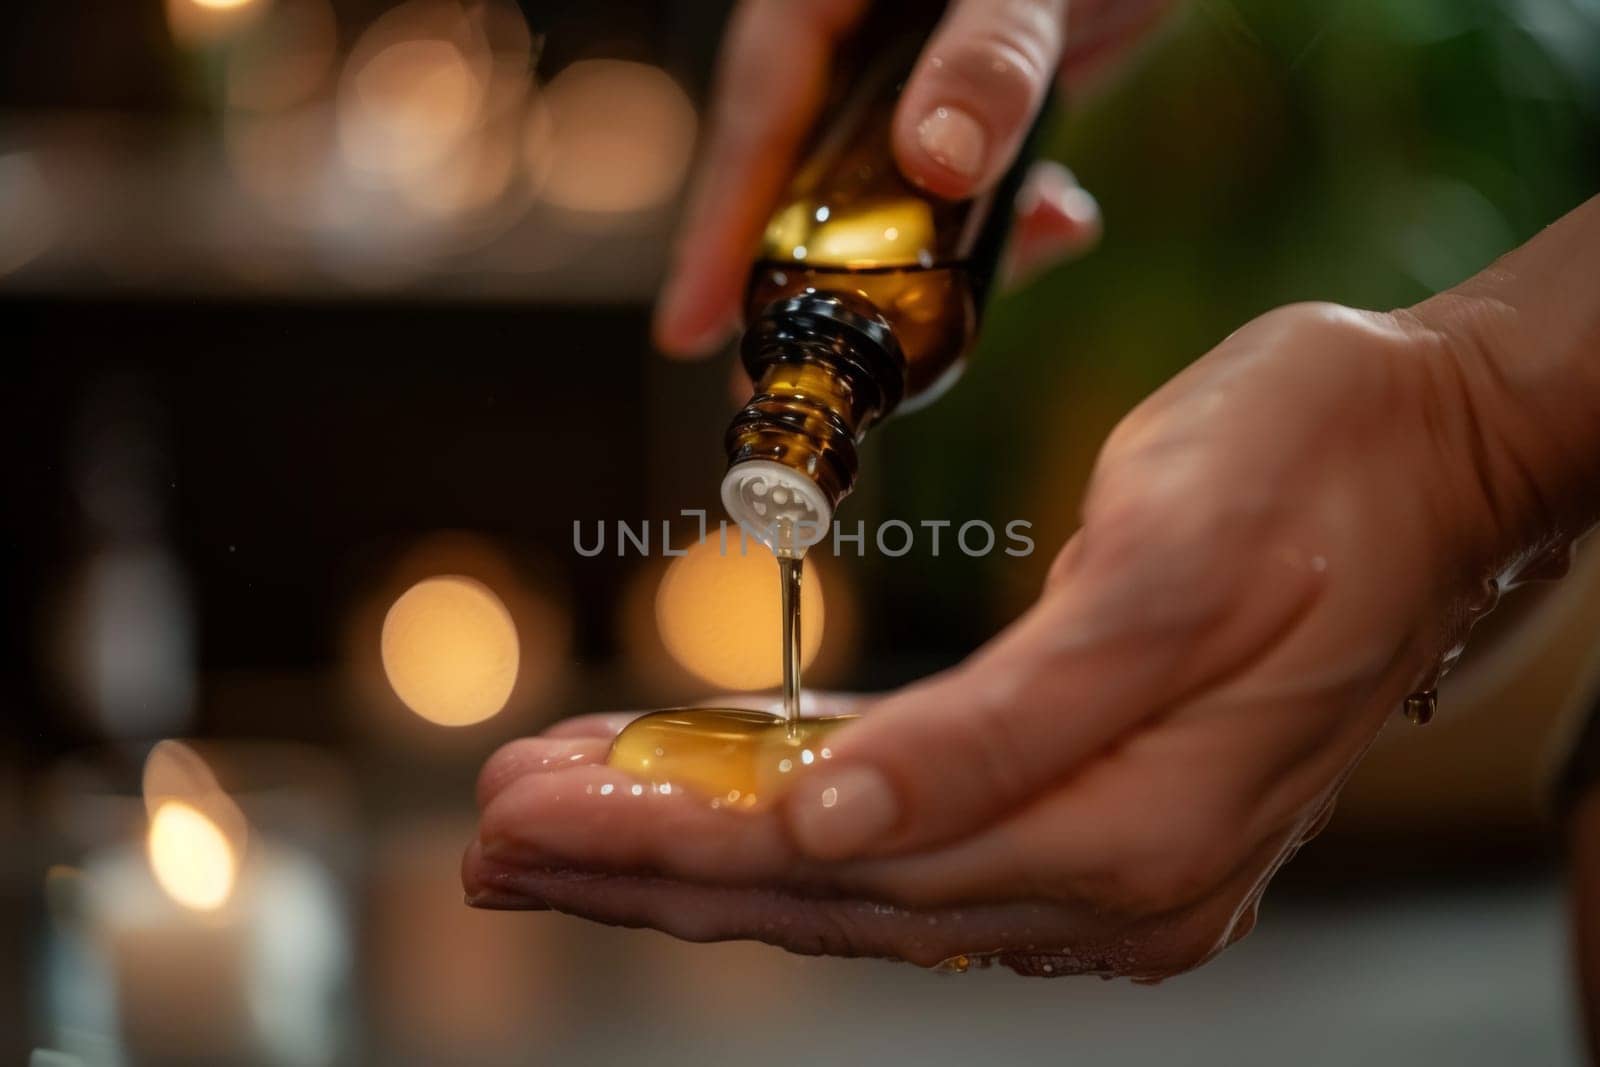 A meticulous process of pouring oil into a hand for a foot treatment, set against a softly lit, warm background.